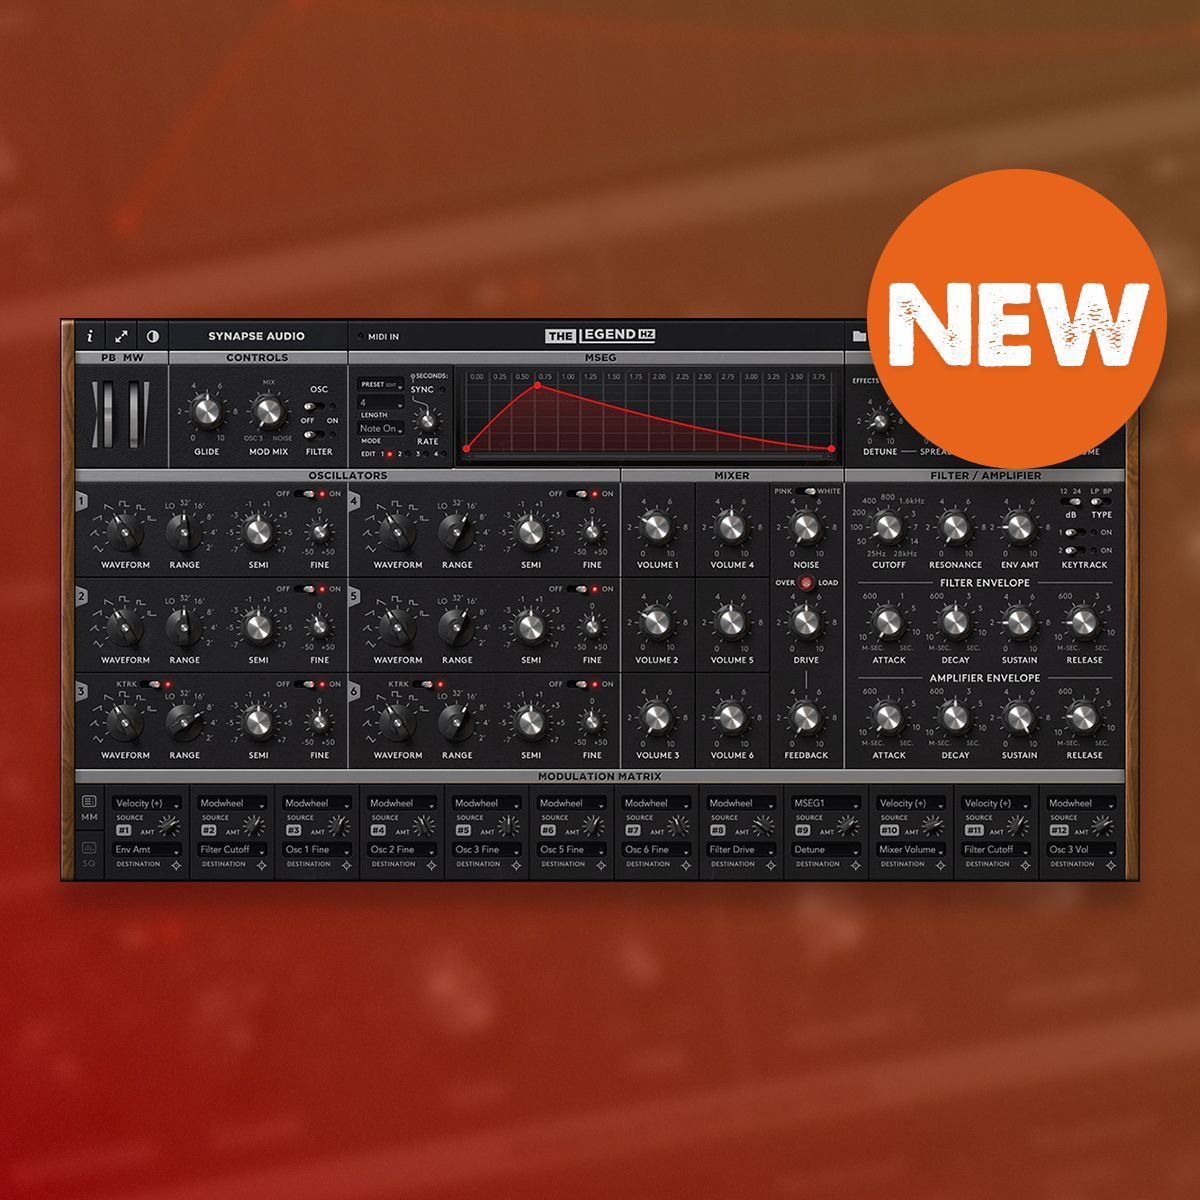 NEW from Synapse Audio - The Legend HZ 🎛️

Created in collaboration with Hans Zimmer, it adds additional oscillators, polyphony, a step sequencer, filters modelled on Zimmer's own vintage hardware, and more!

Check it out here: pluginfox.com/hz